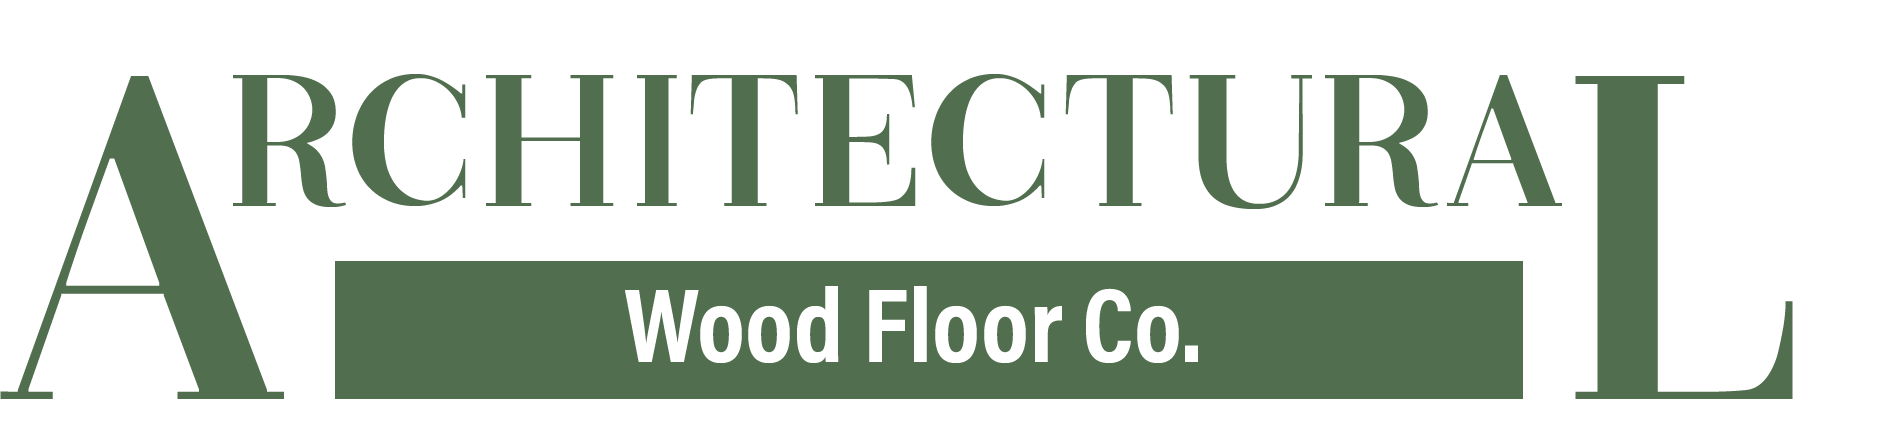 Architectural Wood Floor Co Logo